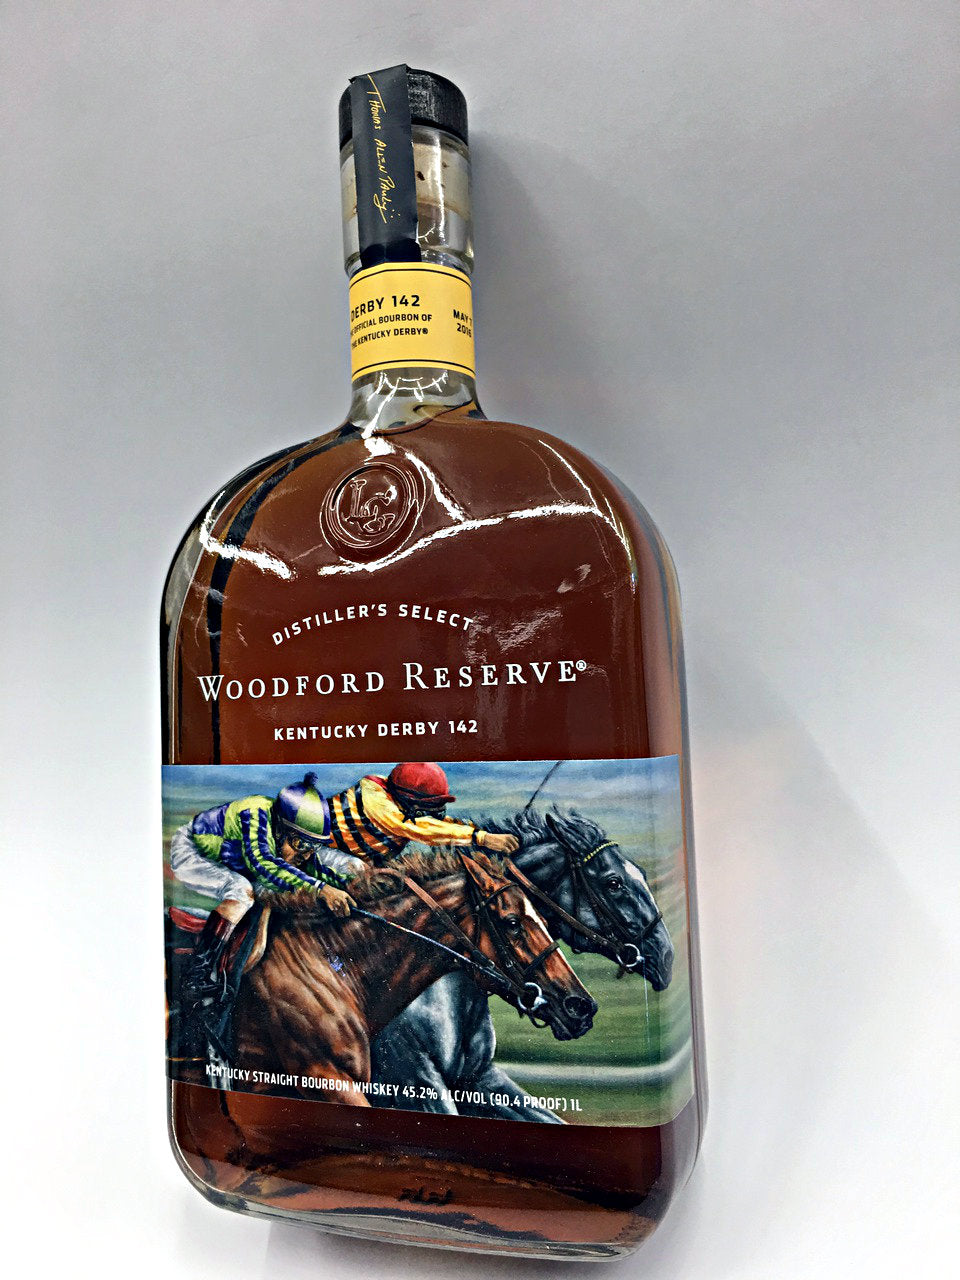 Woodford Reserve Kentucky Derby 142 Limited Edition 2016 - Woodford Reserve